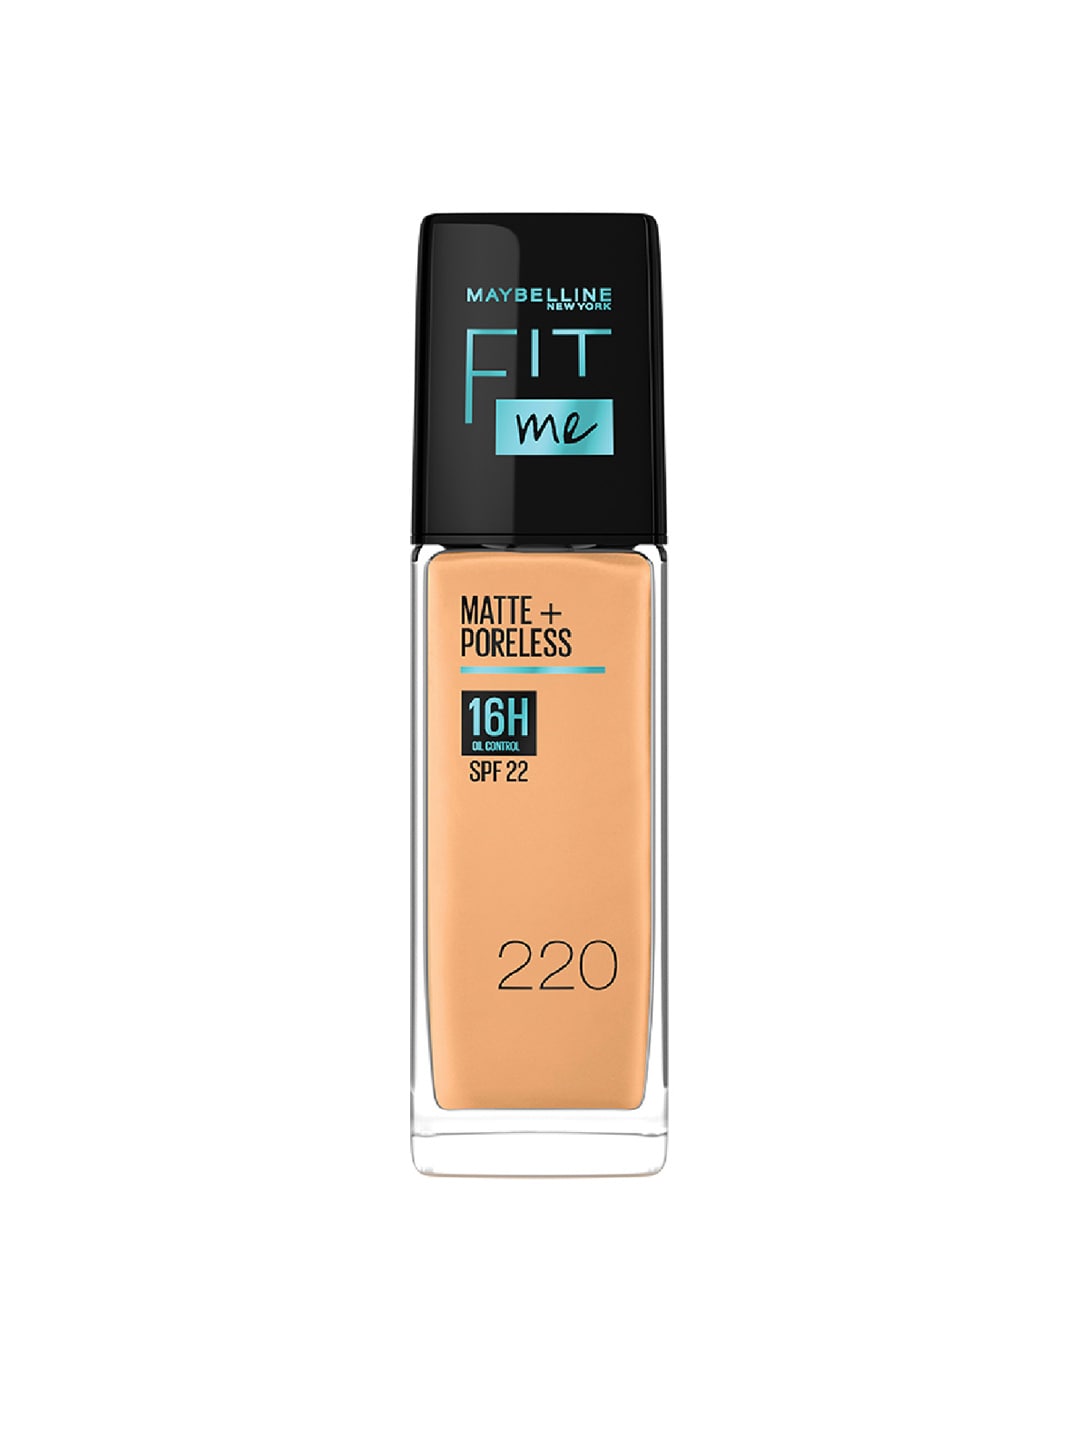 Maybelline New York Fit Me! Matte+Poreless Liquid Foundation 30 ml - Natural Beige 220 Price in India